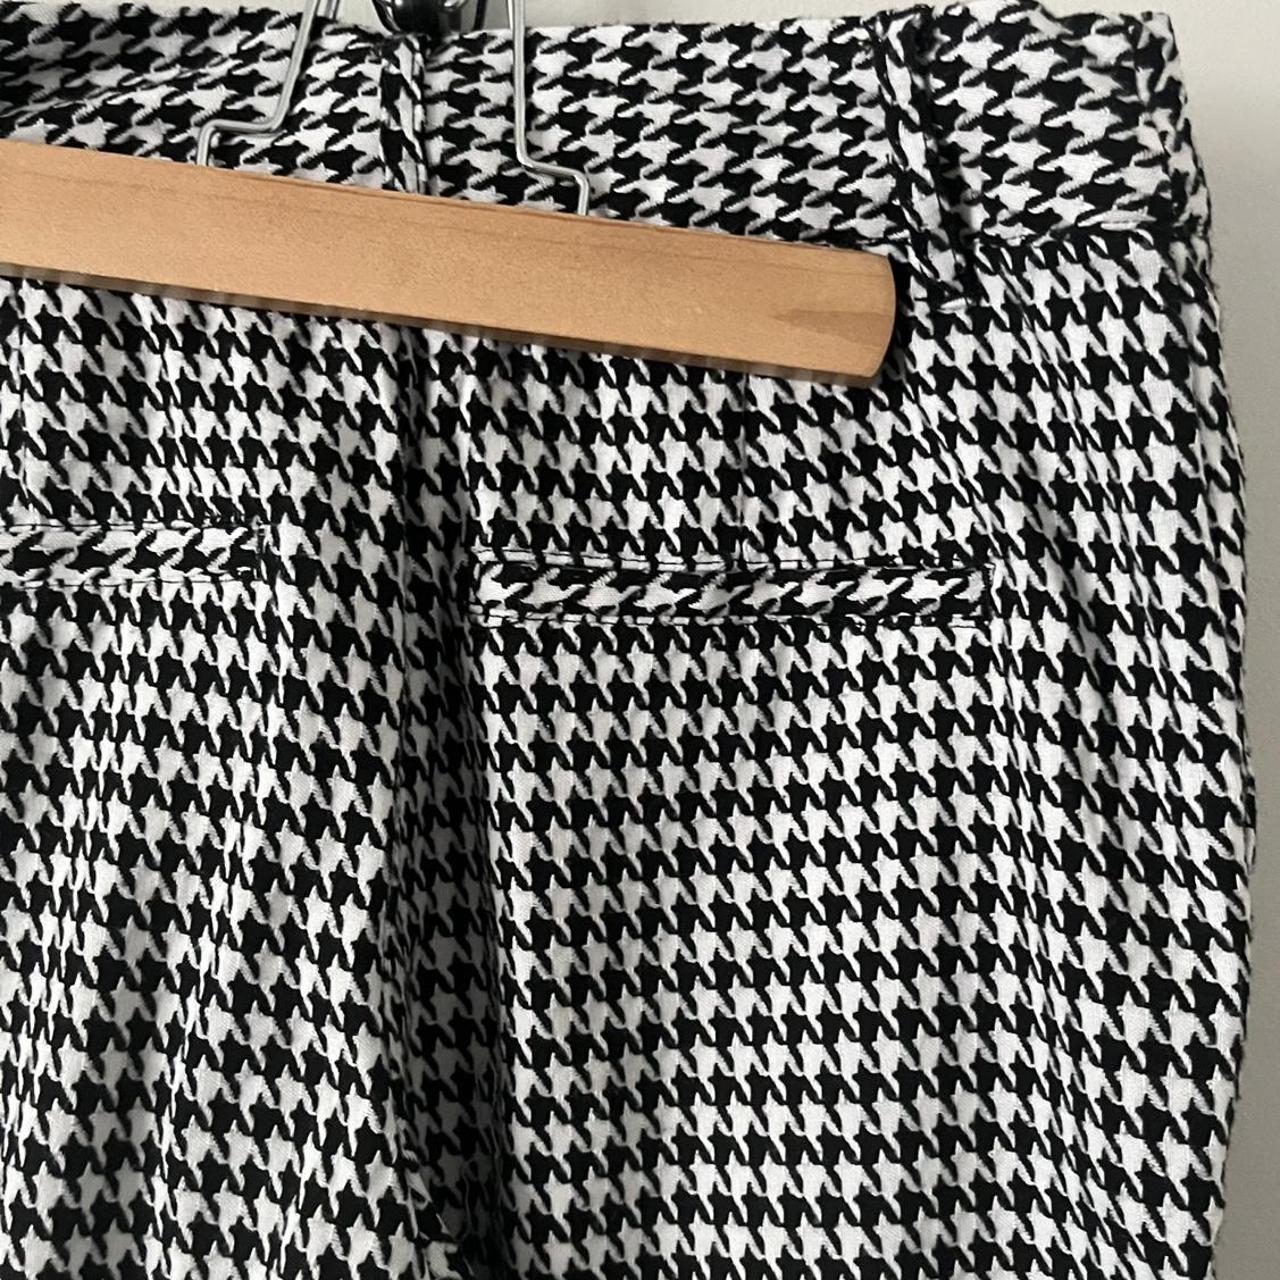 Product Image 2 - Houndstooth pattern pants 

- Size